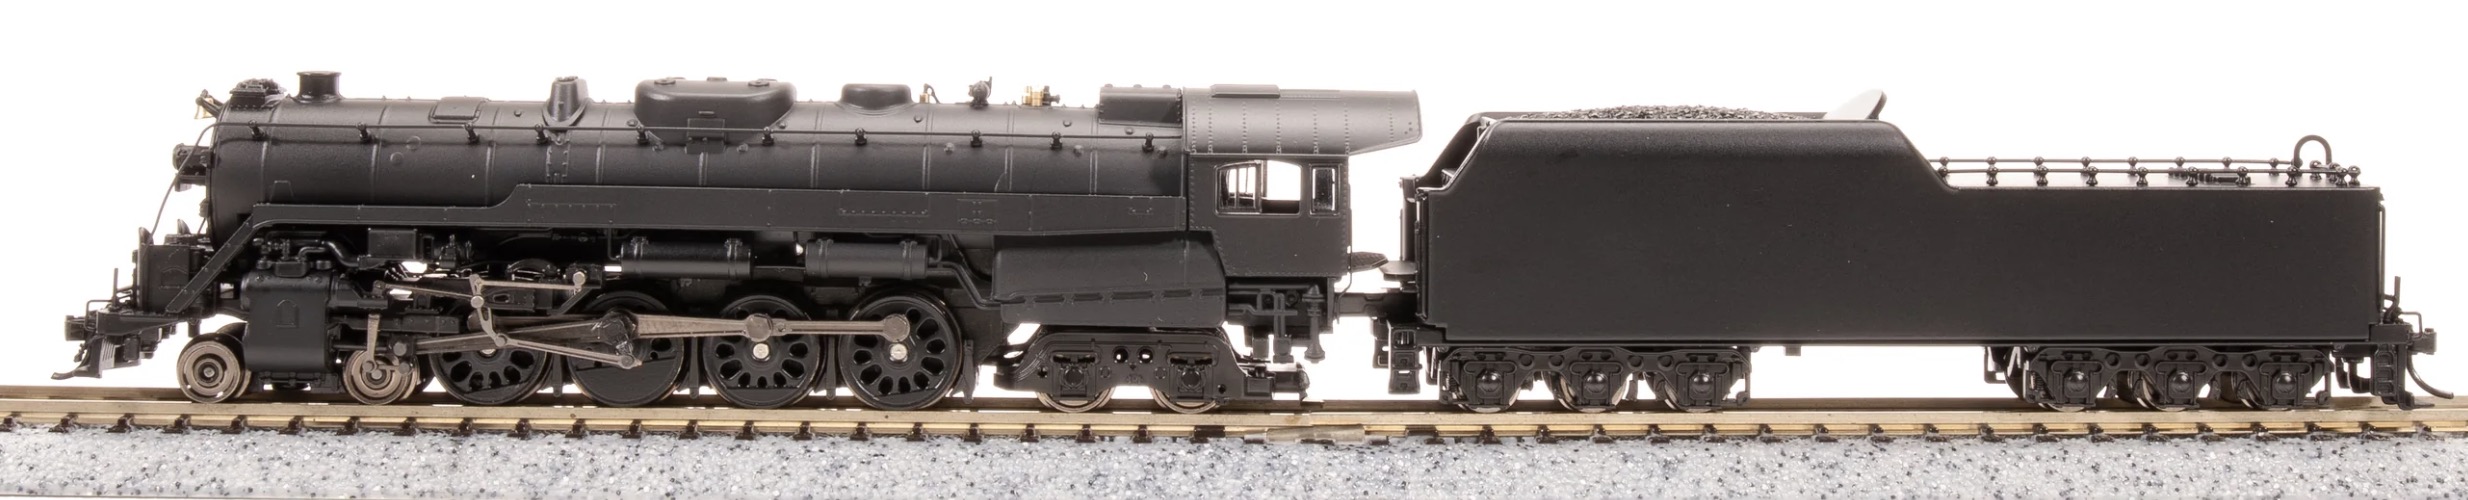 N Scale - Broadway Limited - 8251 - Locomotive, Steam, 4-8-4 T1 - Undecorated